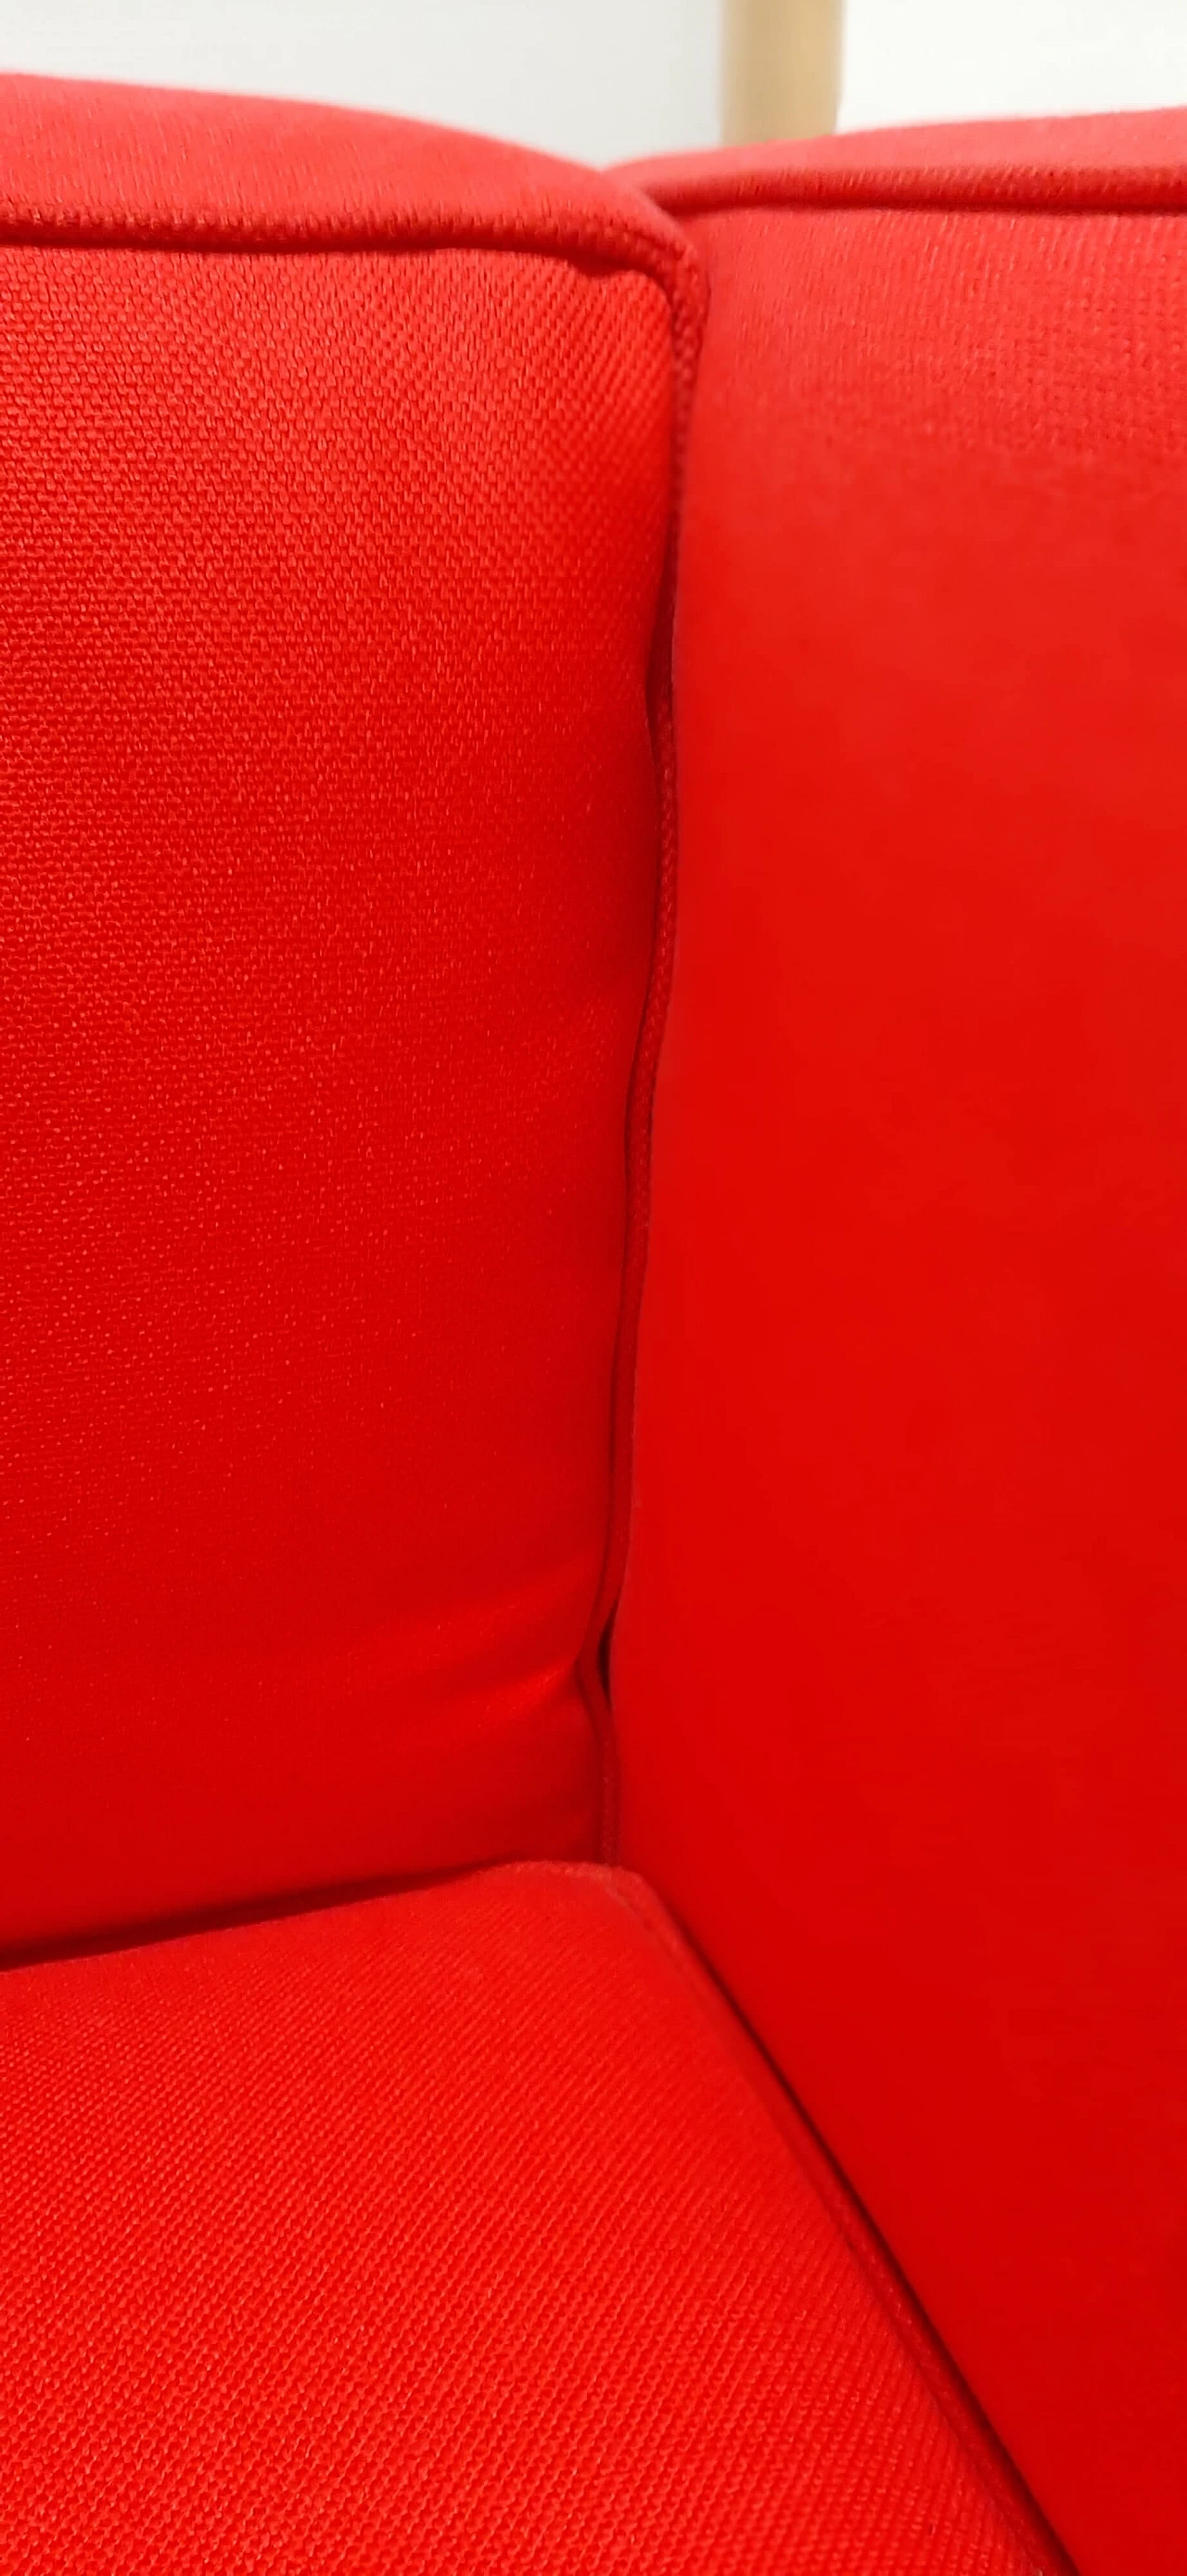 LC 2 armchair in red cotton by Le Corbusier, P. Jeanneret, C. Perriand for Alivar, 1980s 21